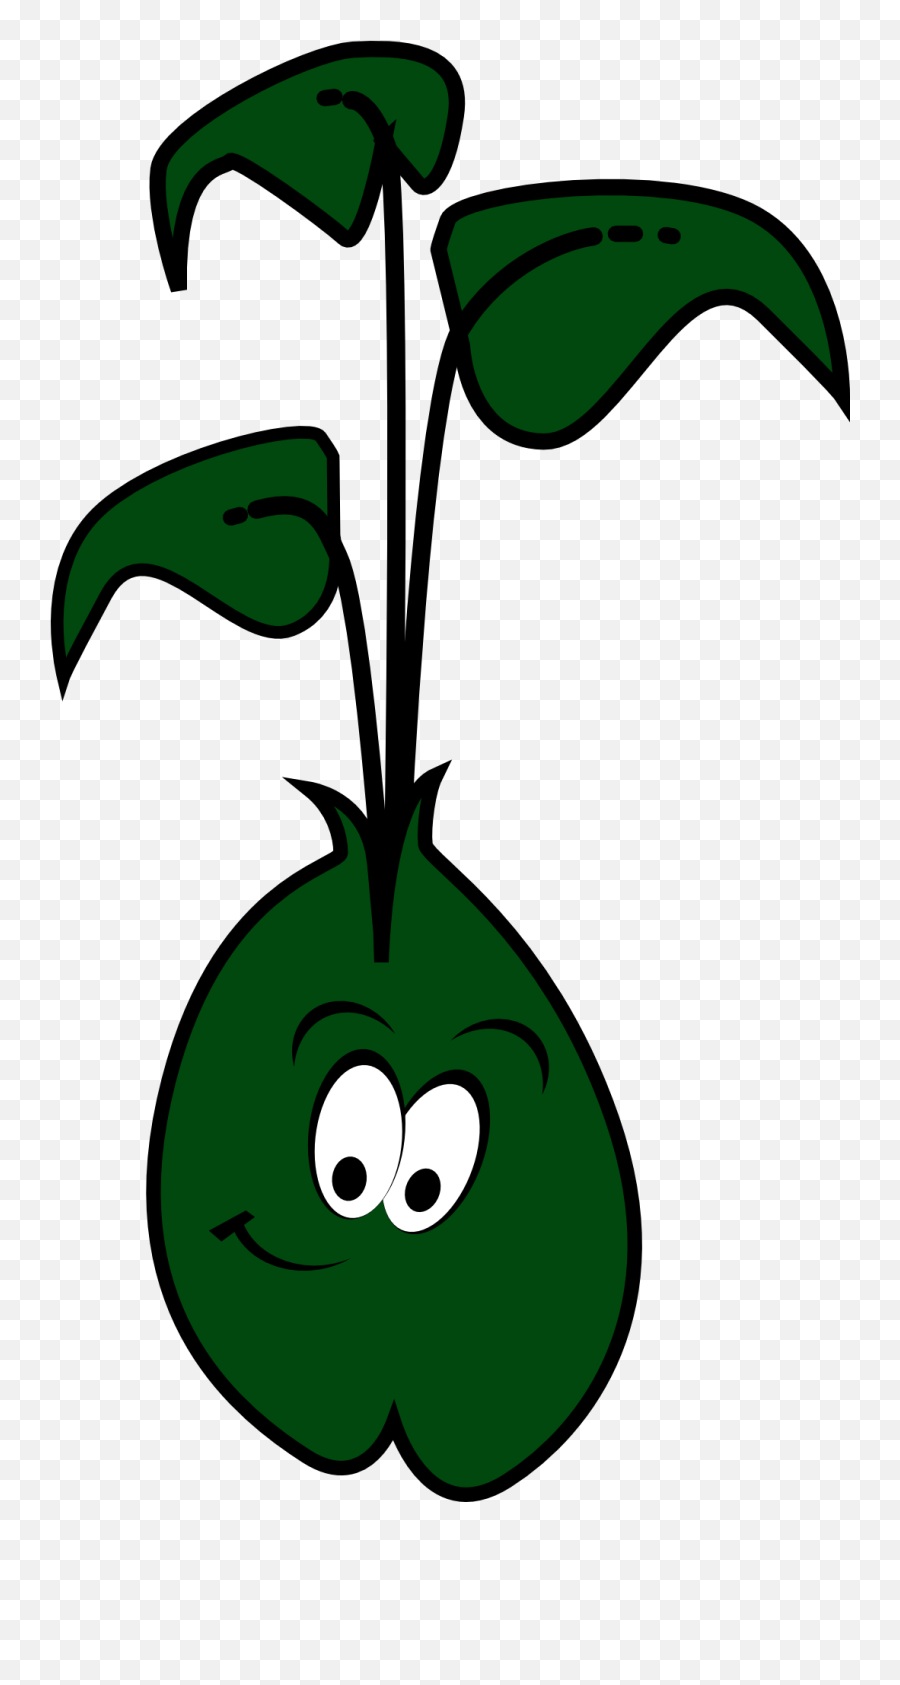 Bean Sprout Smiling As An Illustration - Cartoon Character For Sprout Emoji,Bean Sprout Emoticon